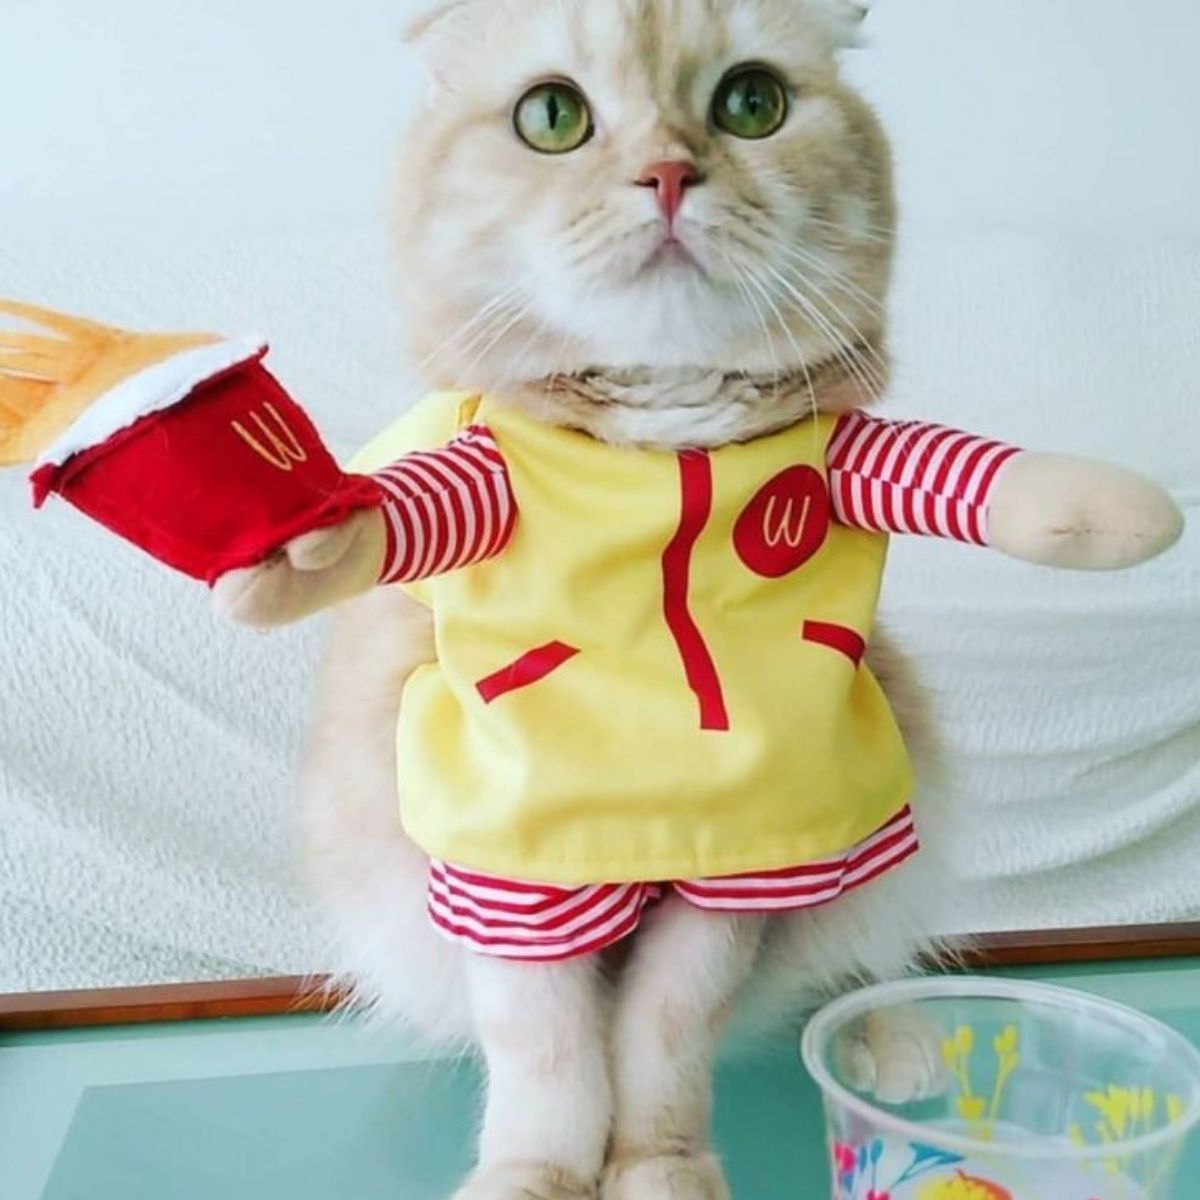 25 Costumes That Prove Cats Always Win At Halloween - The Paws